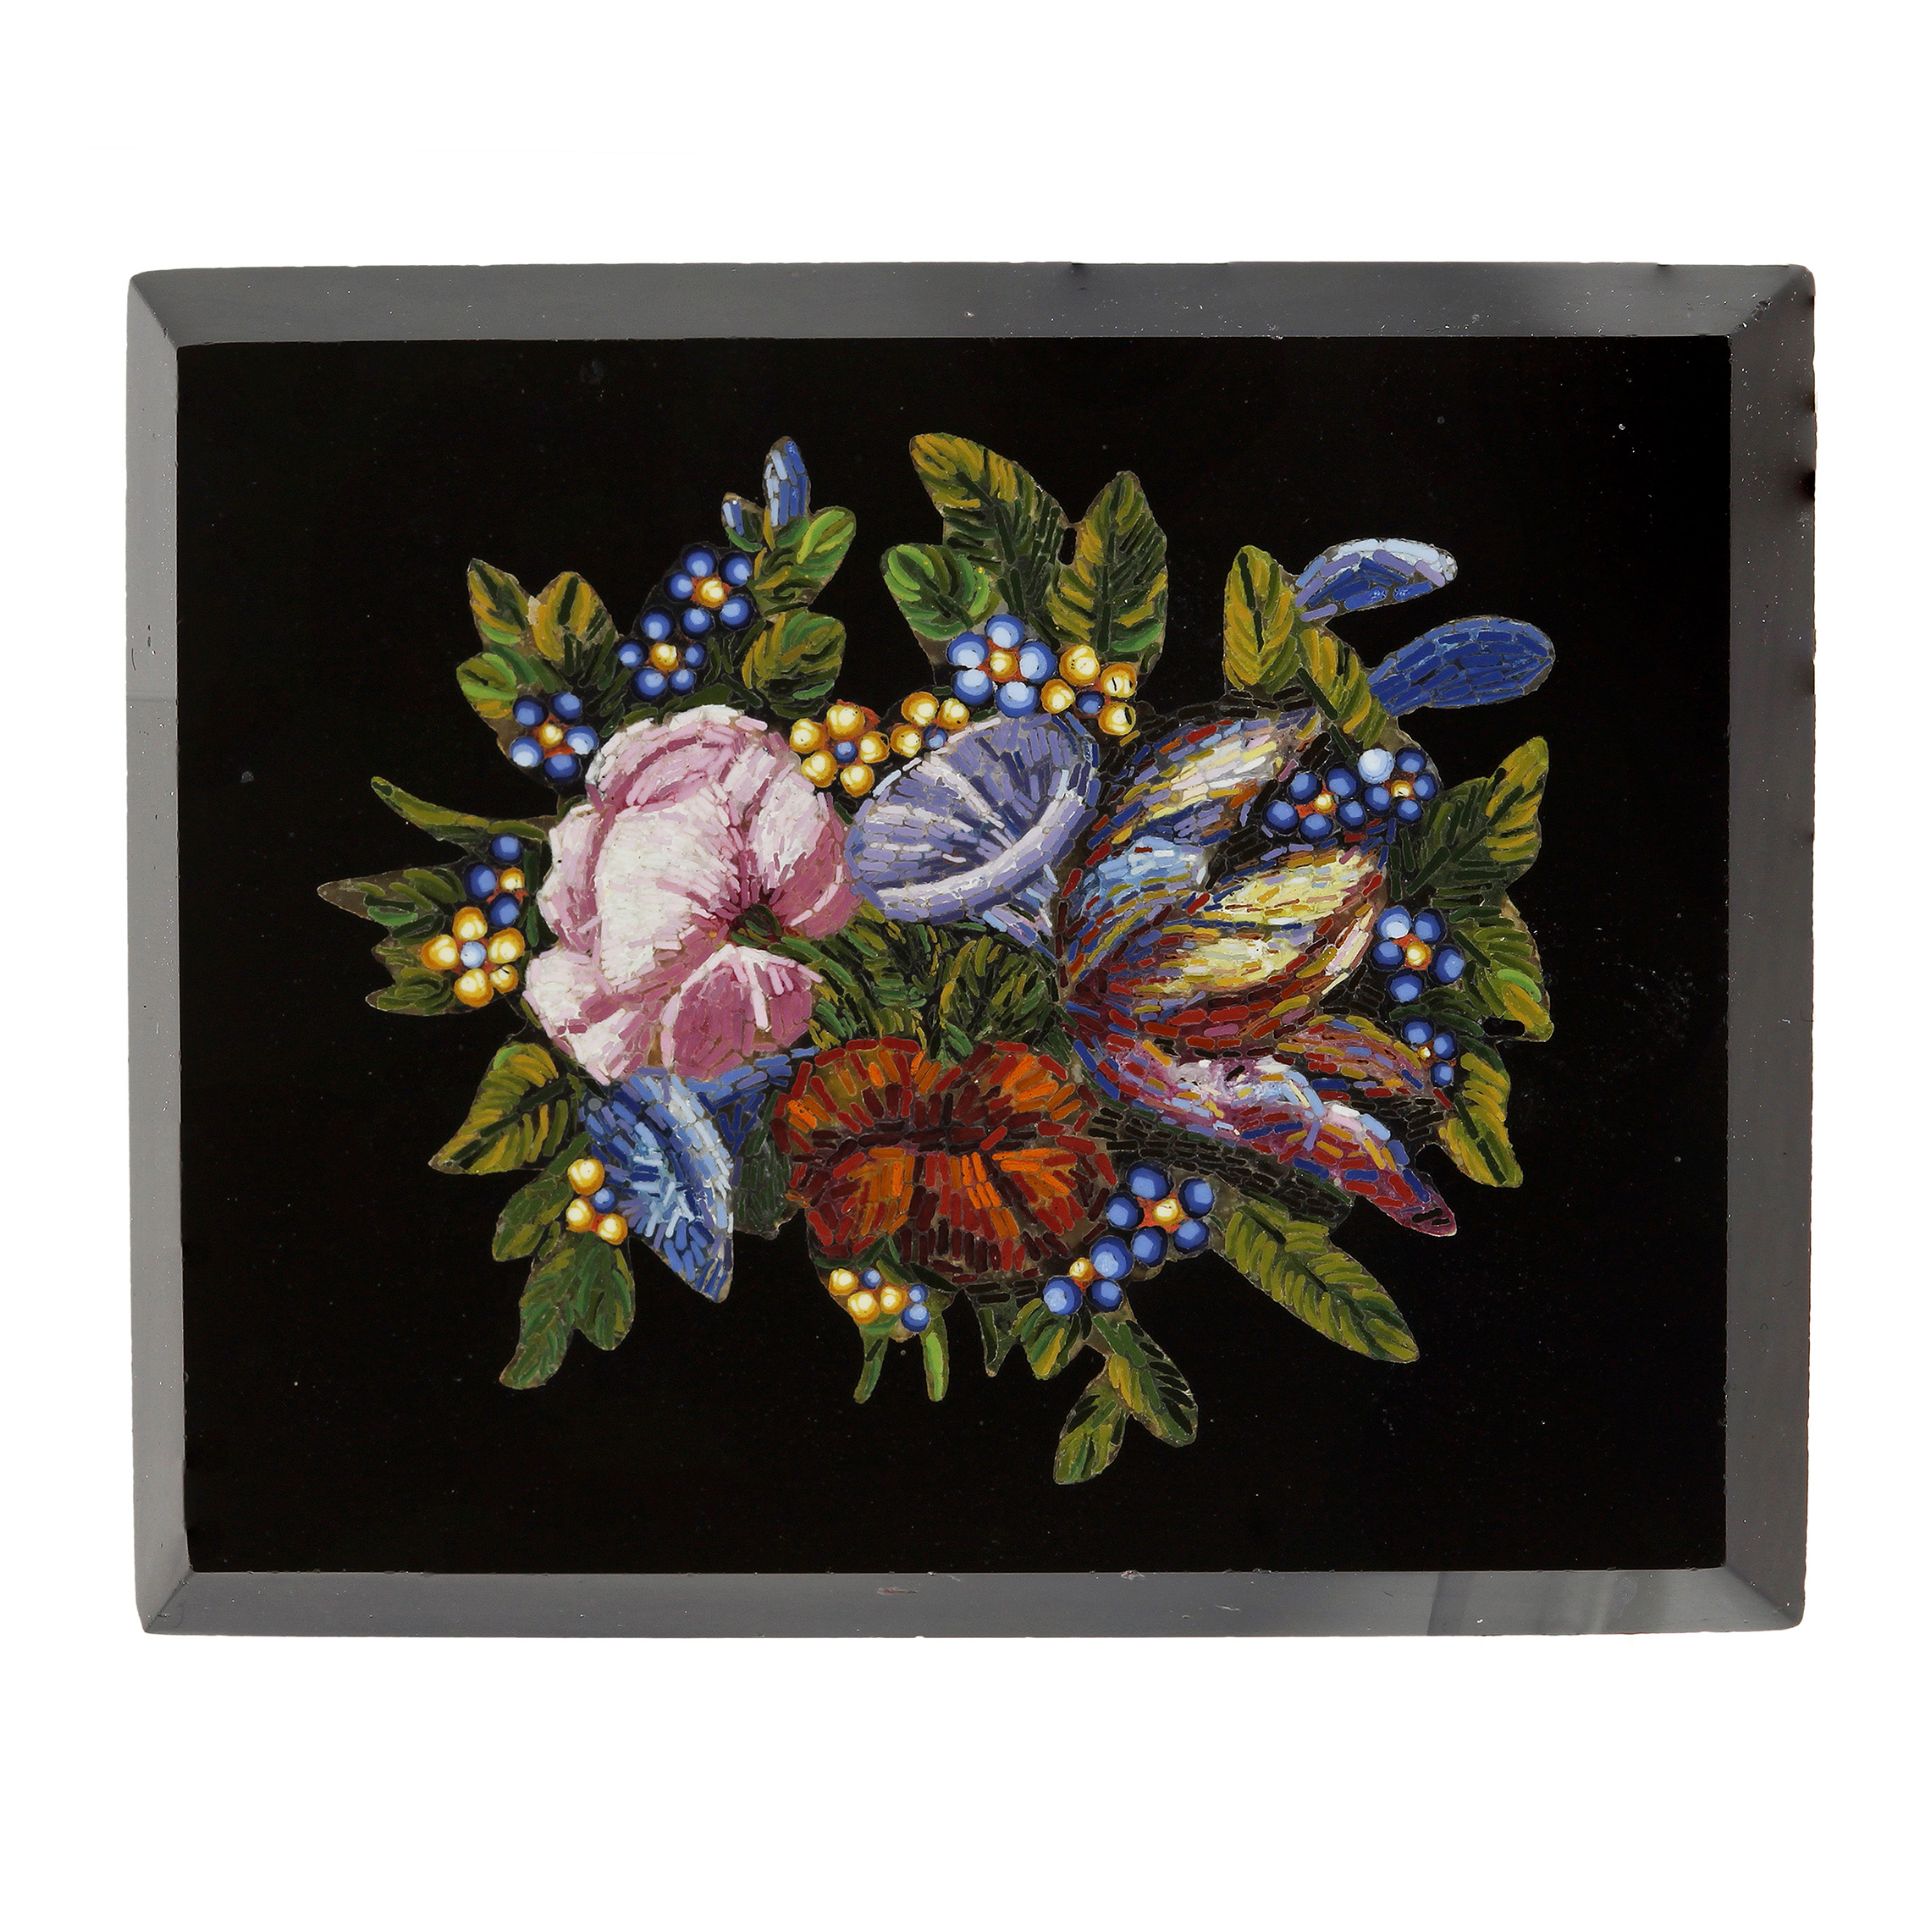 AN ANTIQUE MICROMOSAIC JEWEL the rectangular black hardstone panel inset with a micromosaic